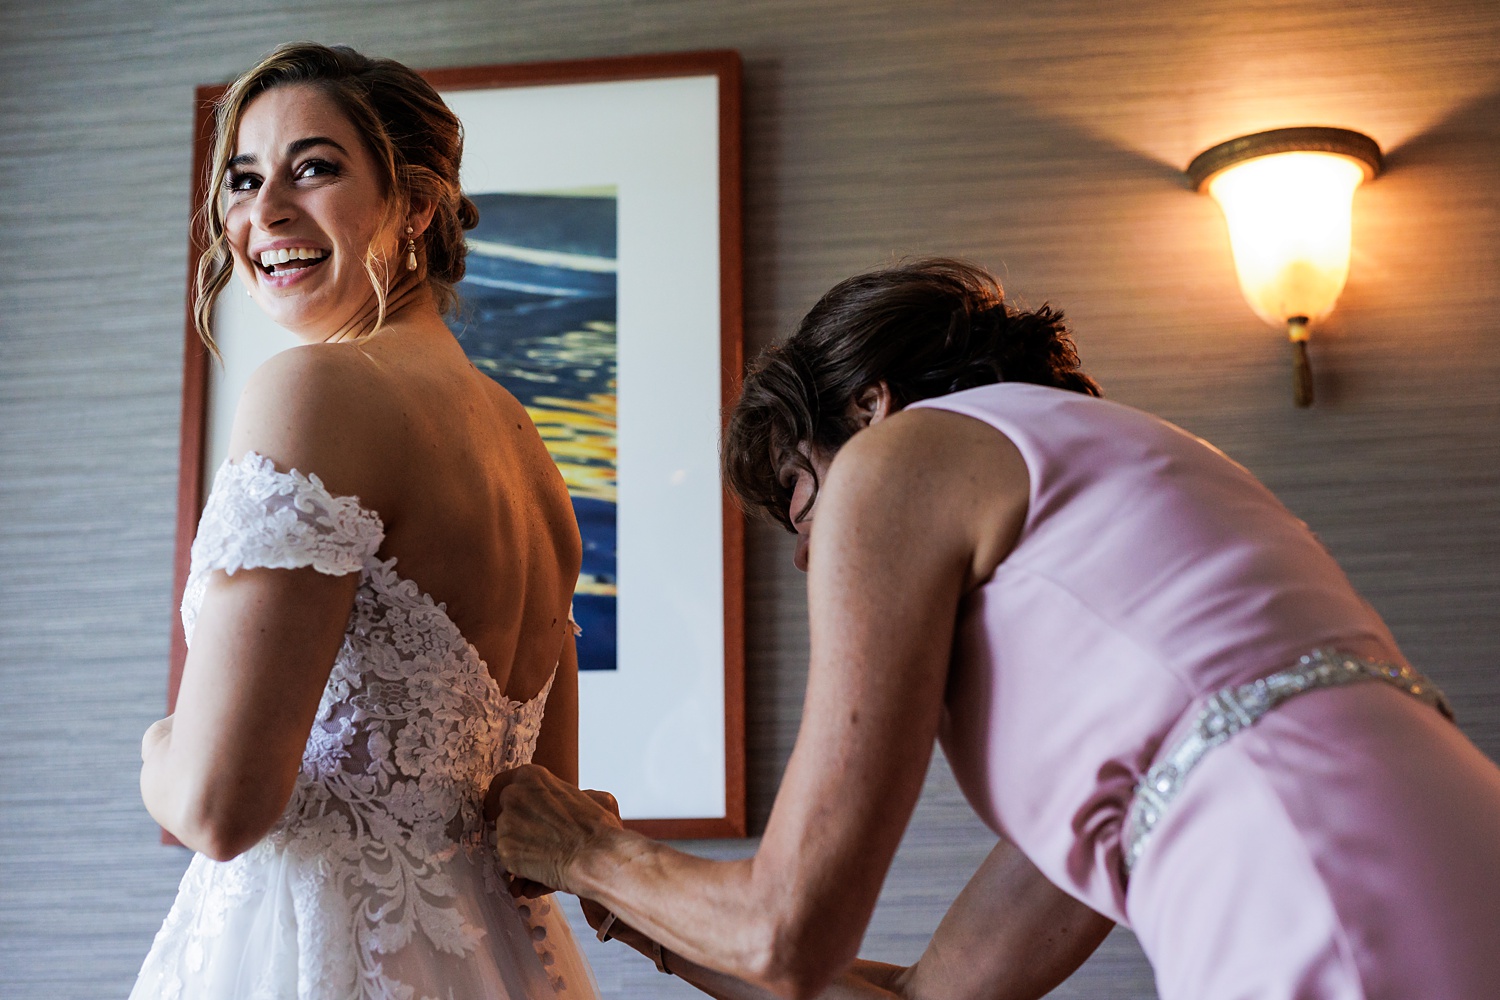 The bride gets into her wedding attire with her mom